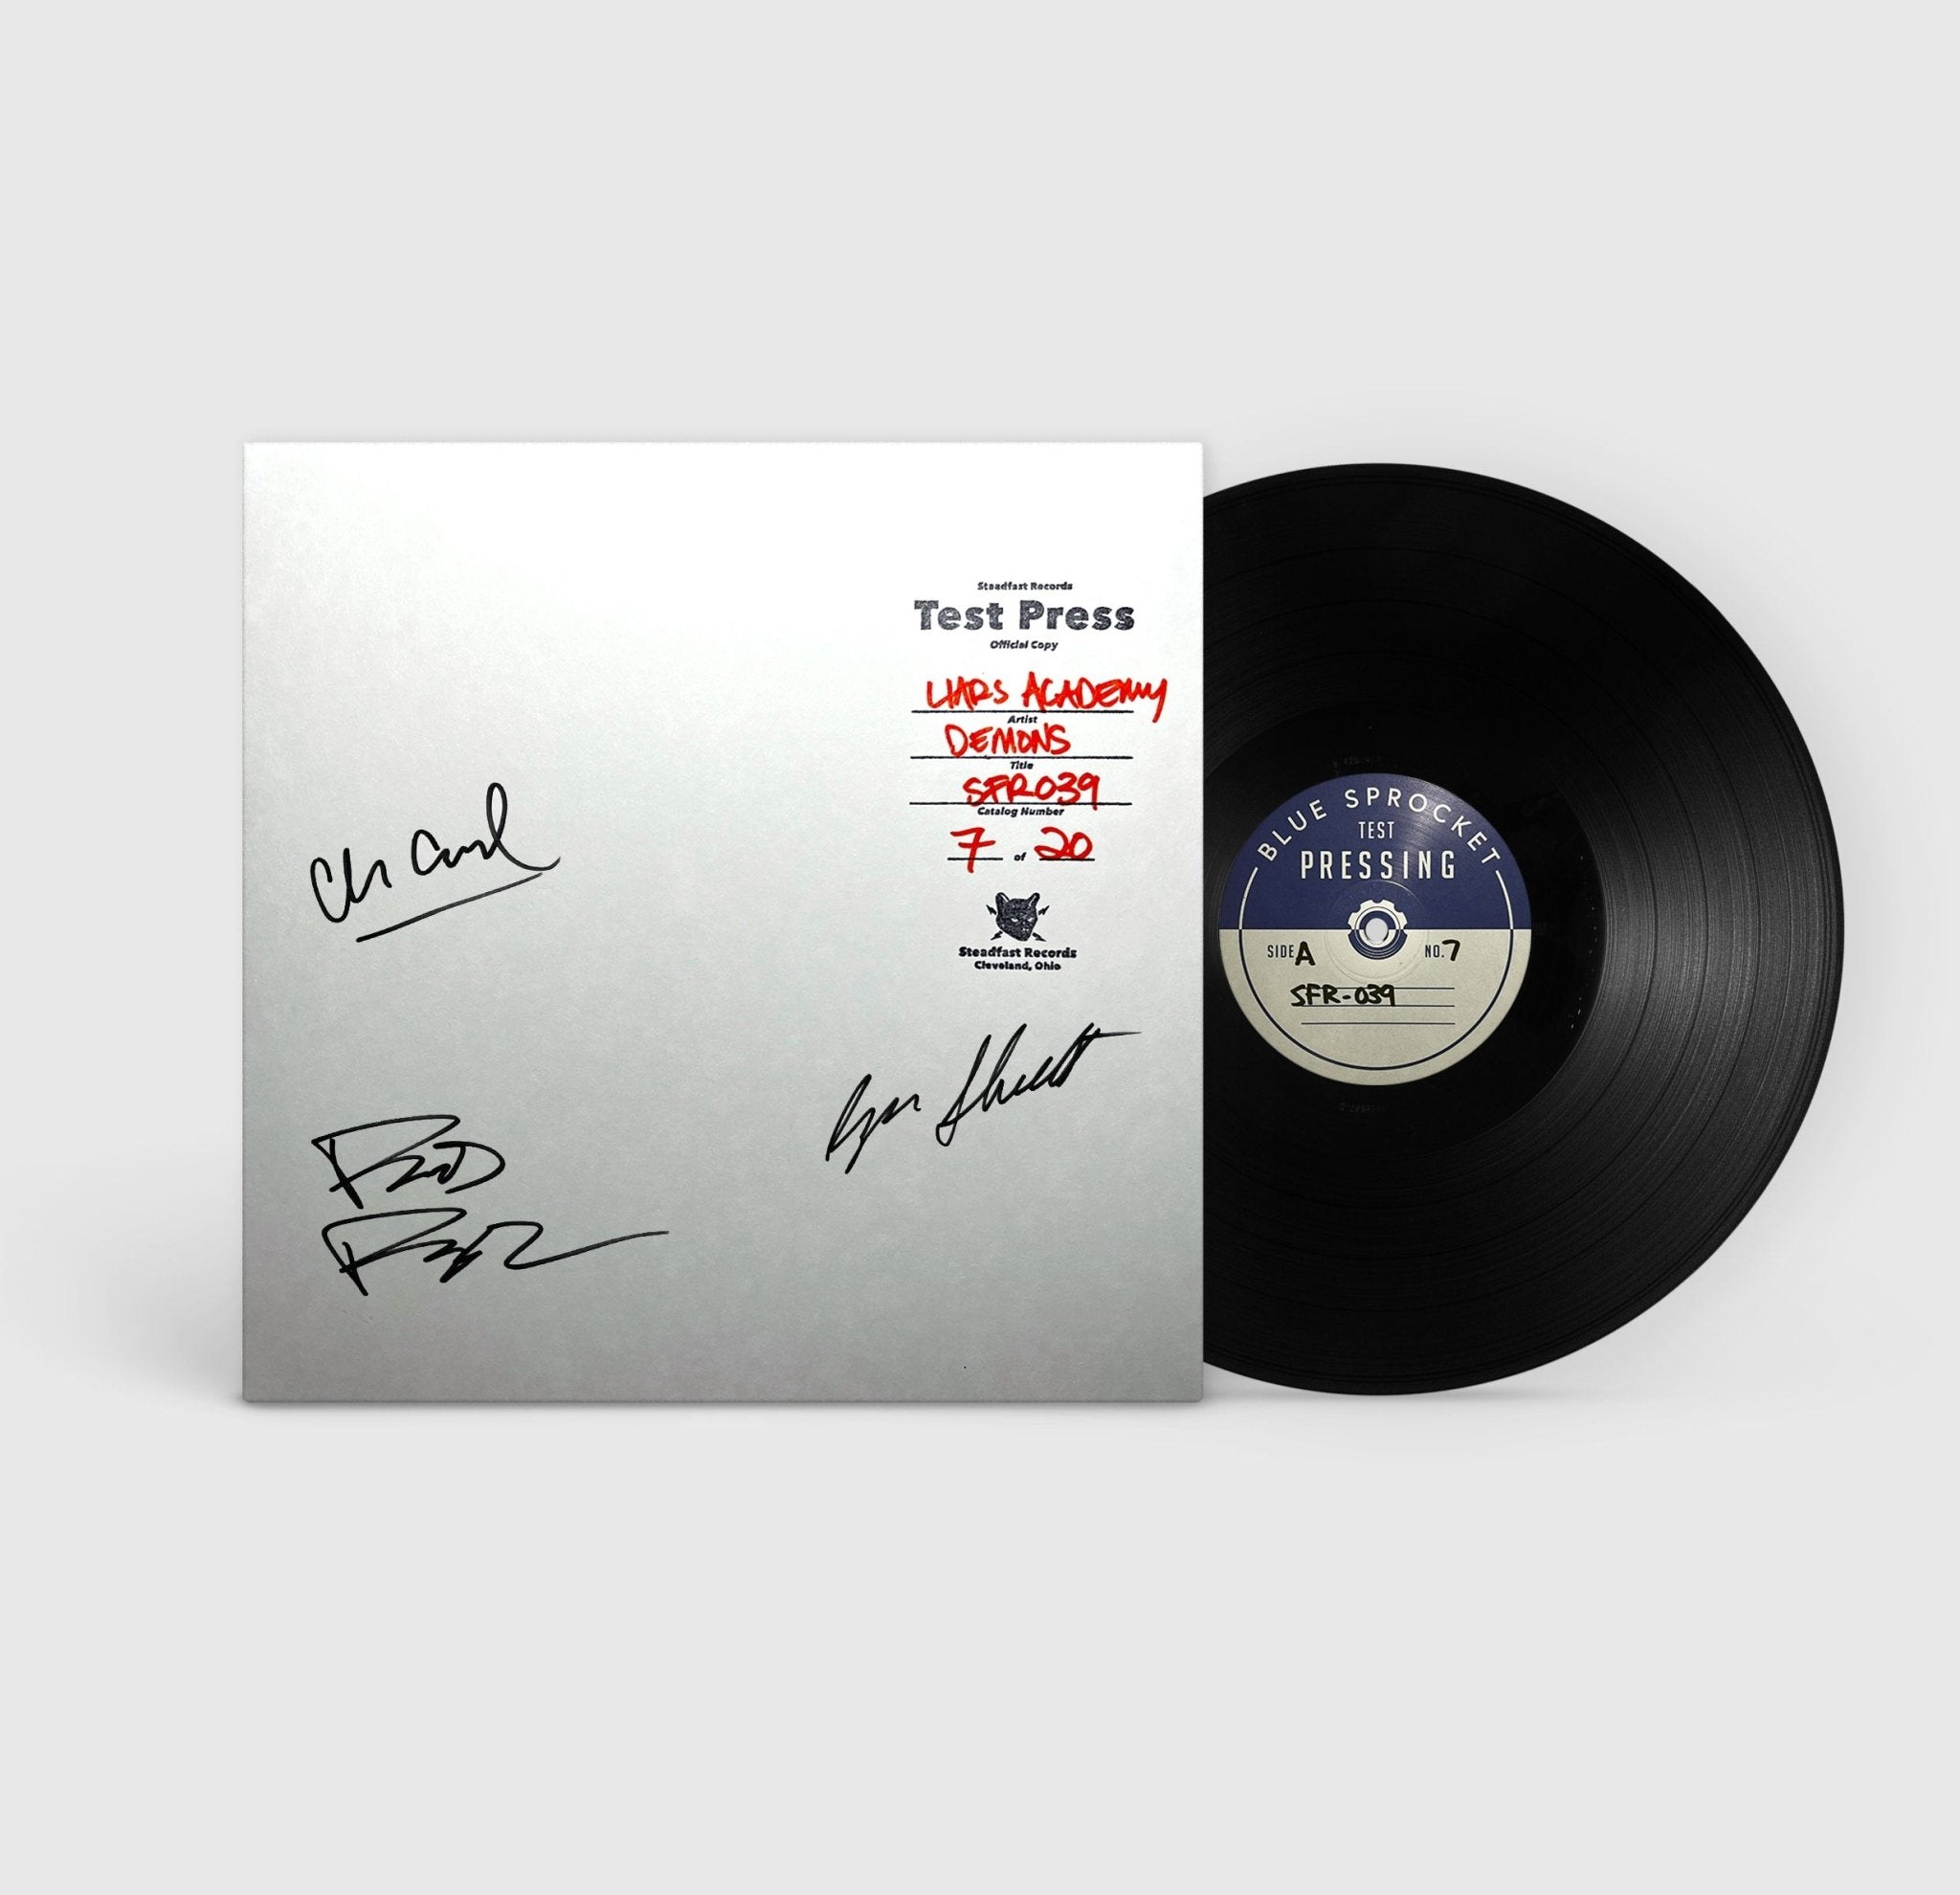 Liars Academy: Demons: Autographed Test Press - Steadfast Records